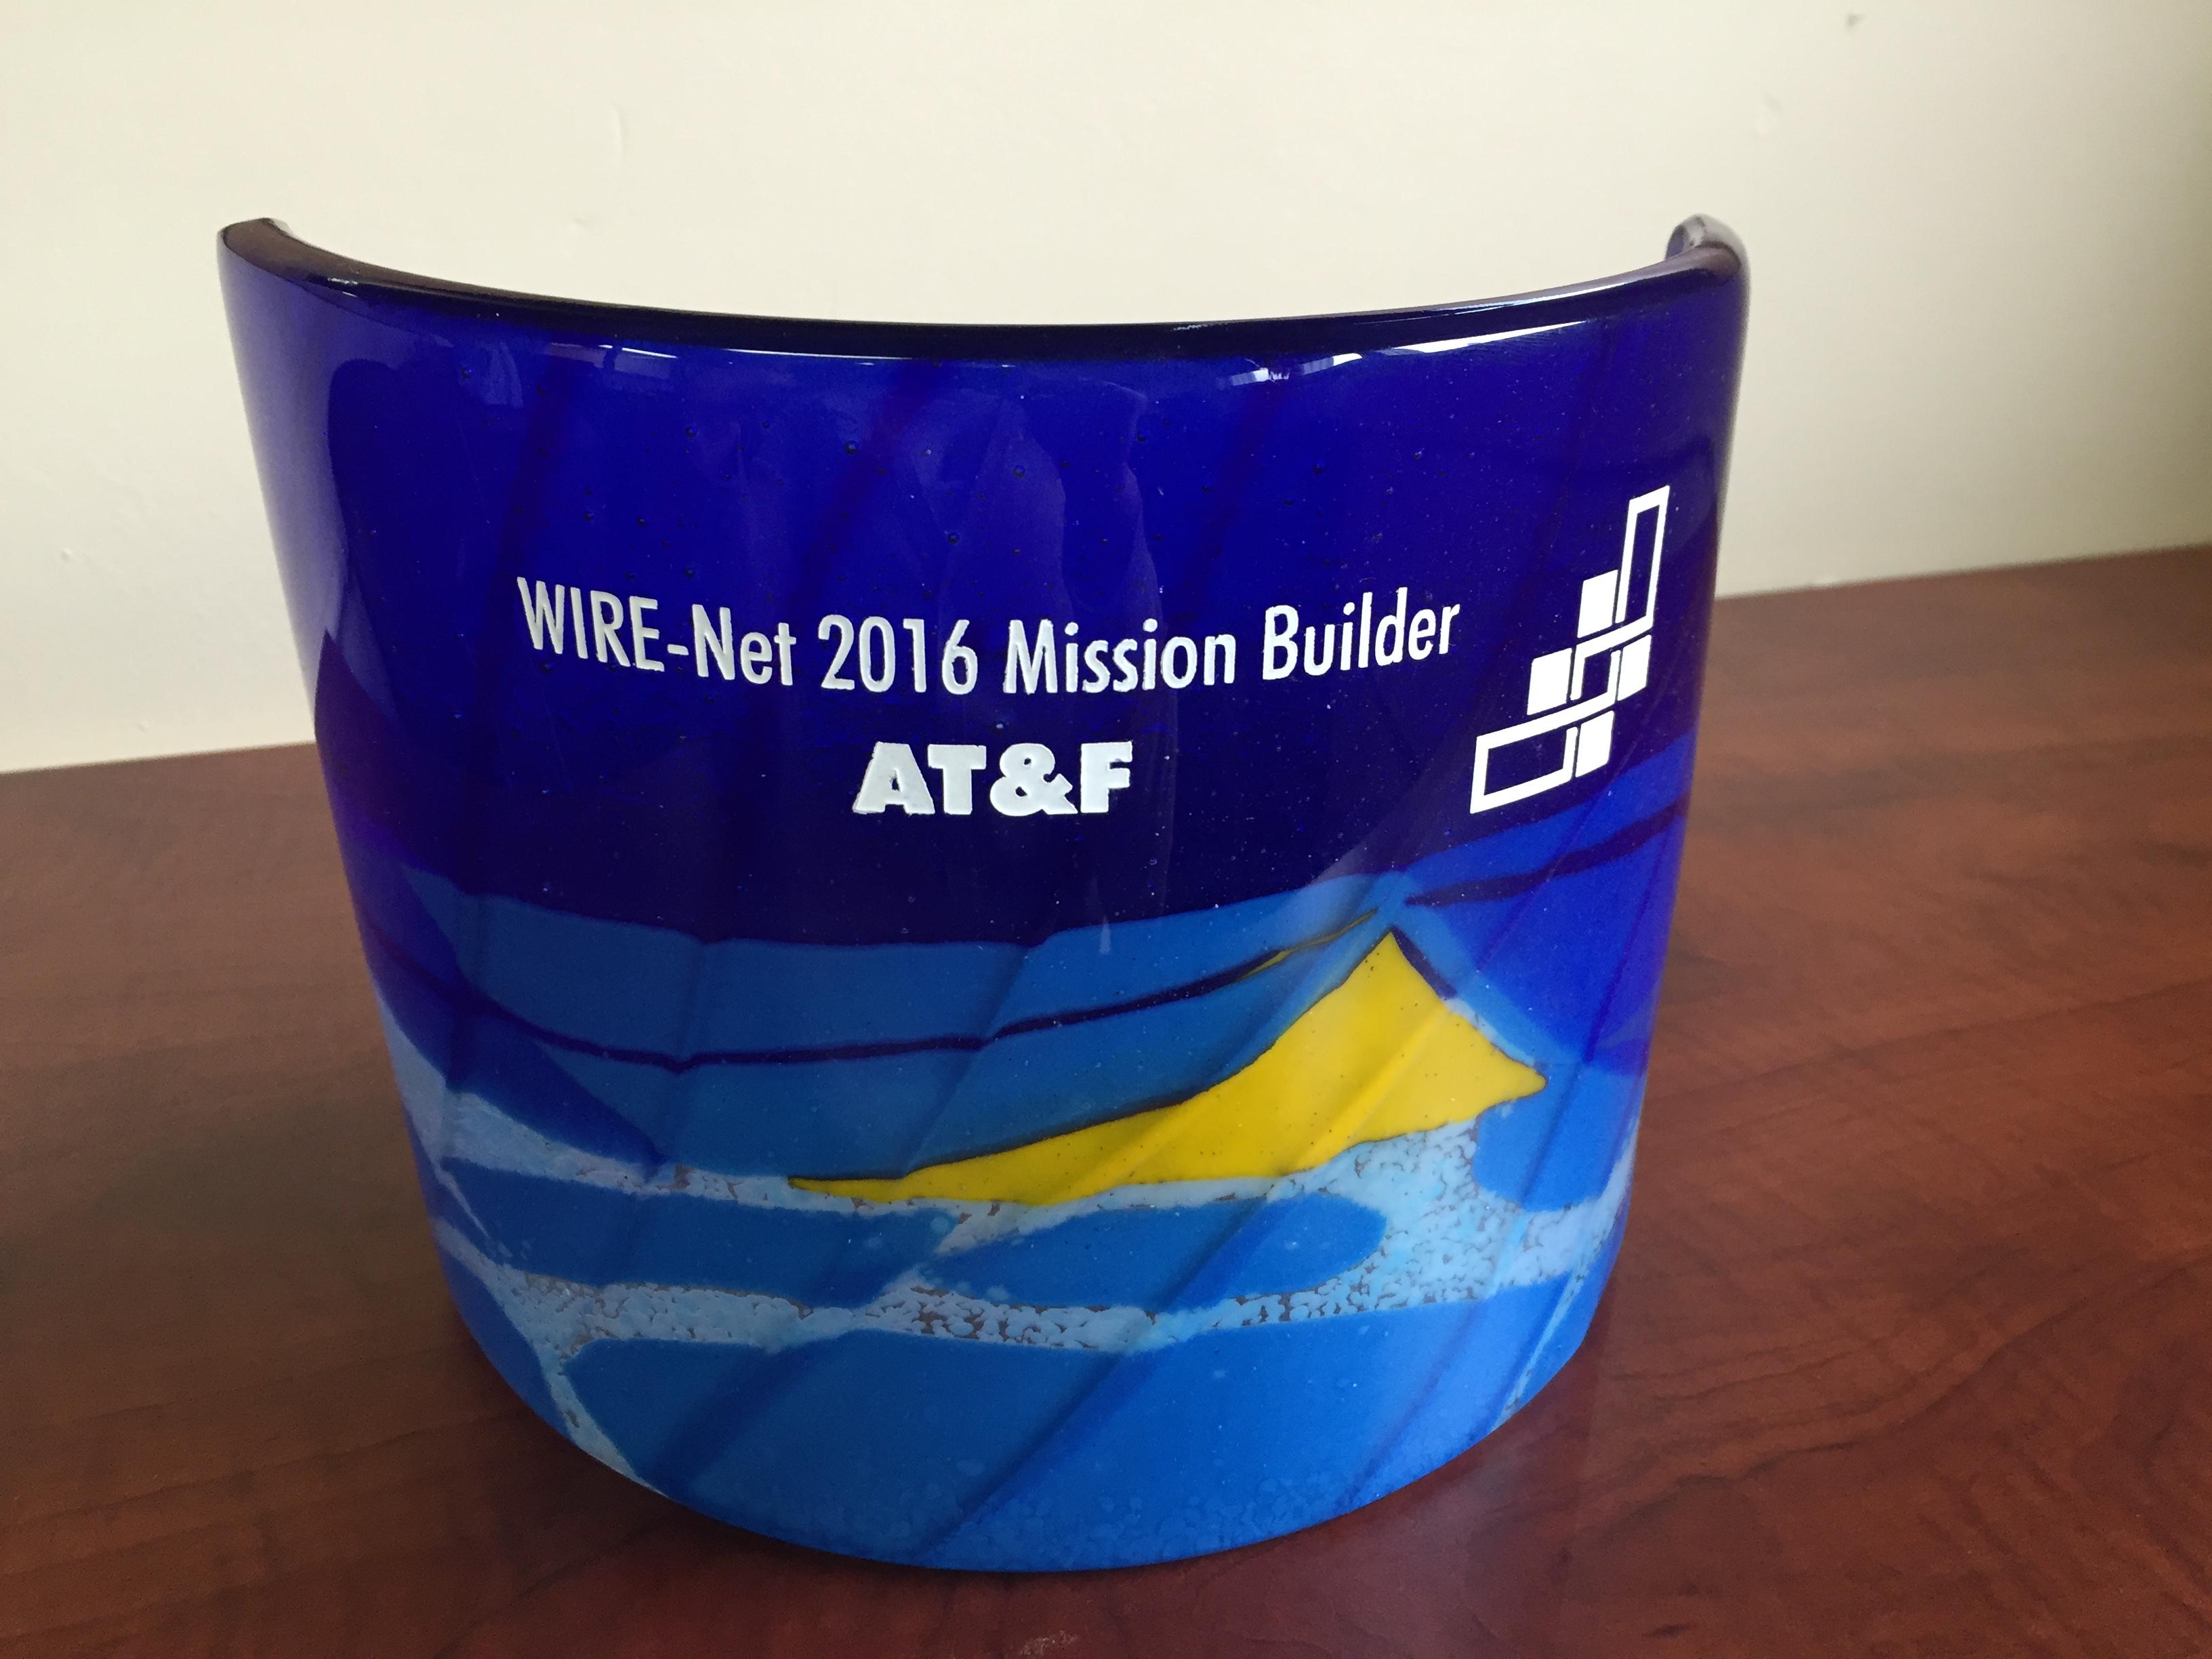 And WIRE-Net's Mission Builder Award Goes To...